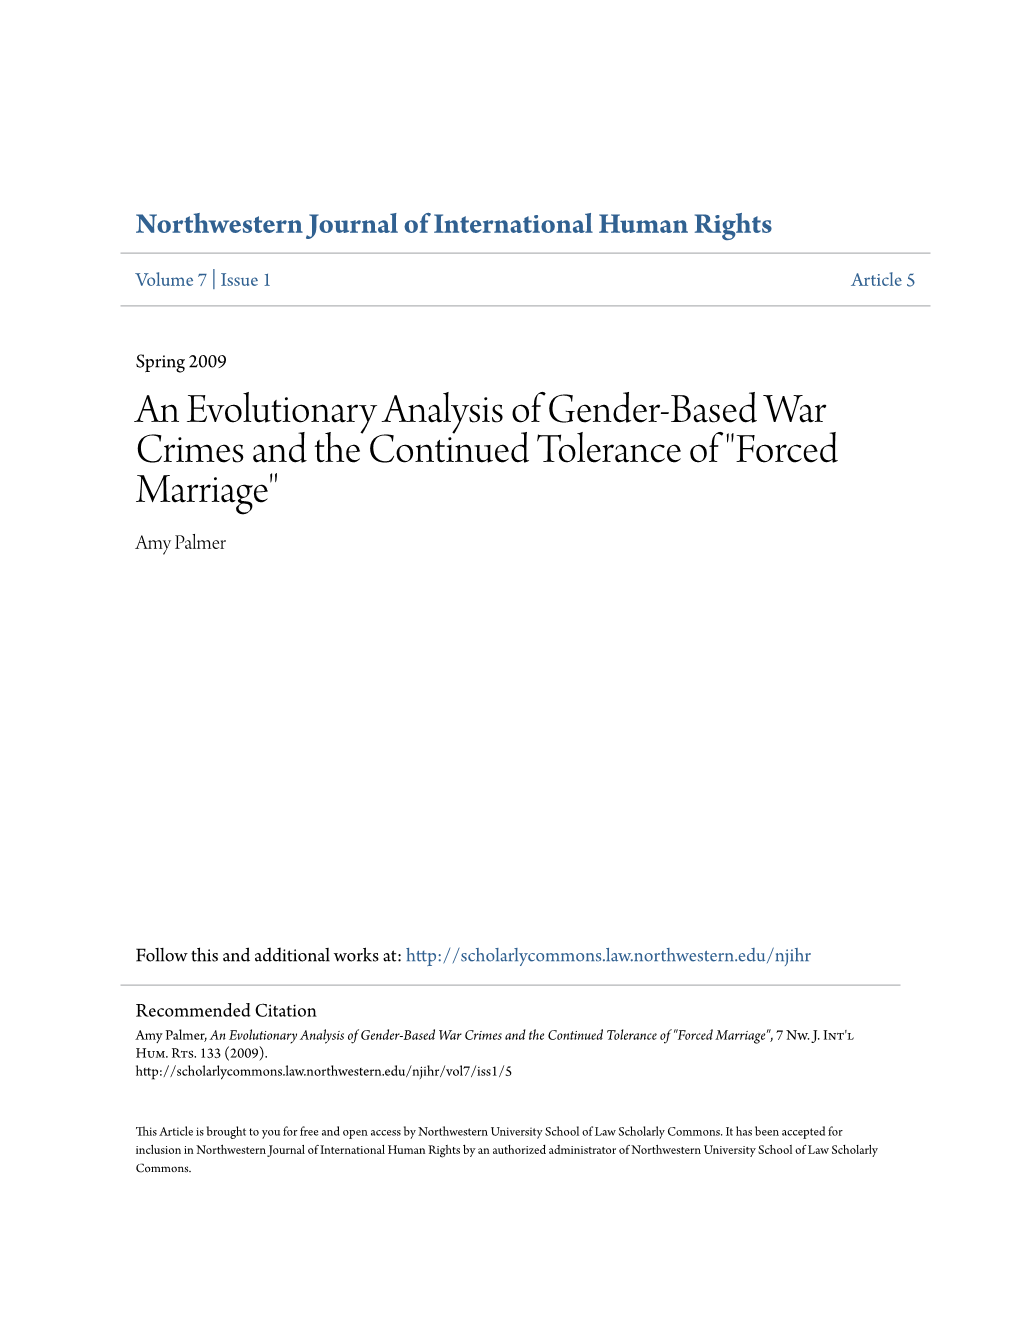 An Evolutionary Analysis of Gender-Based War Crimes and the Continued Tolerance of "Forced Marriage" Amy Palmer